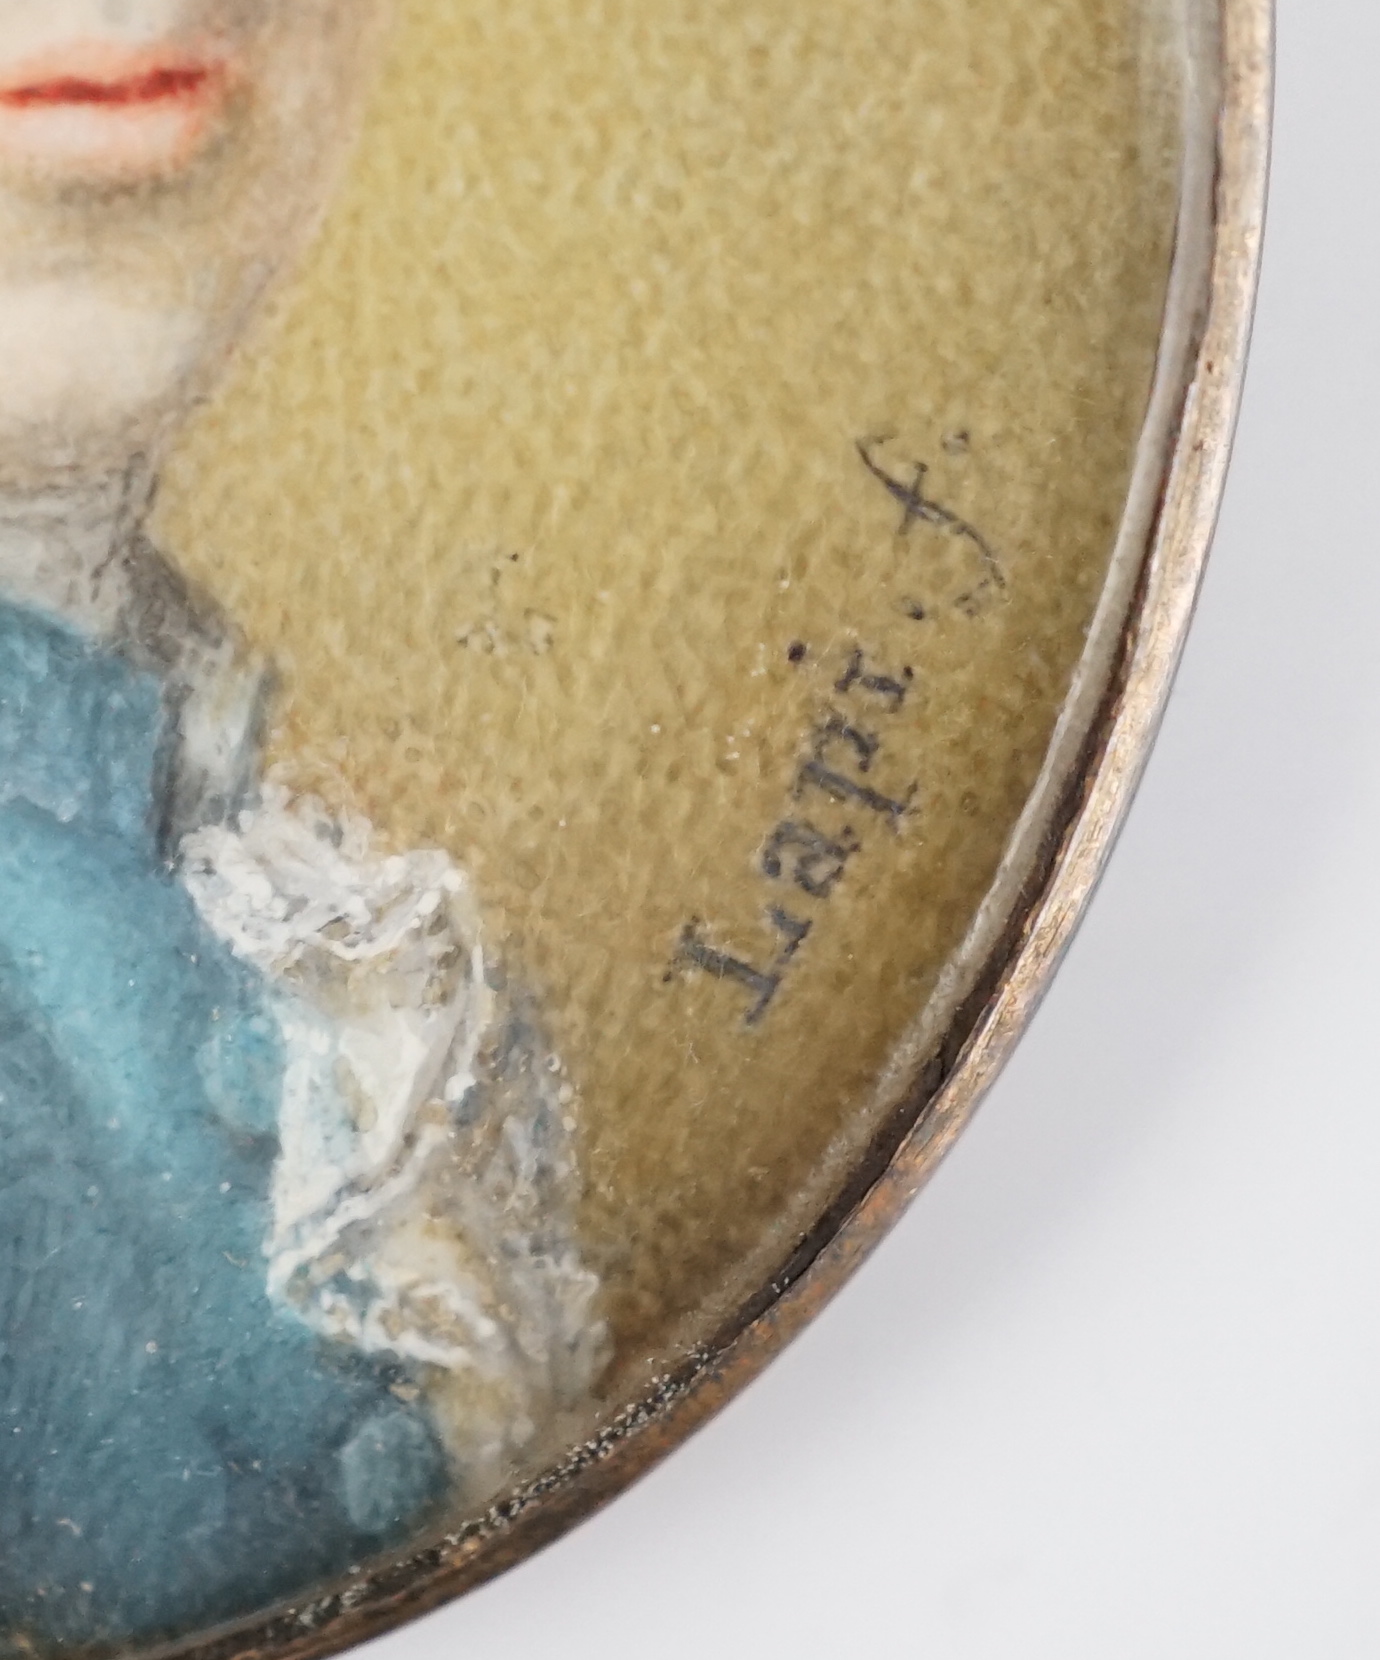 Lapi (circa 1775), Portrait miniature of a gentleman, oil on ivory, 3.5 x 2.8cm. CITES Submission reference WX9PFE22